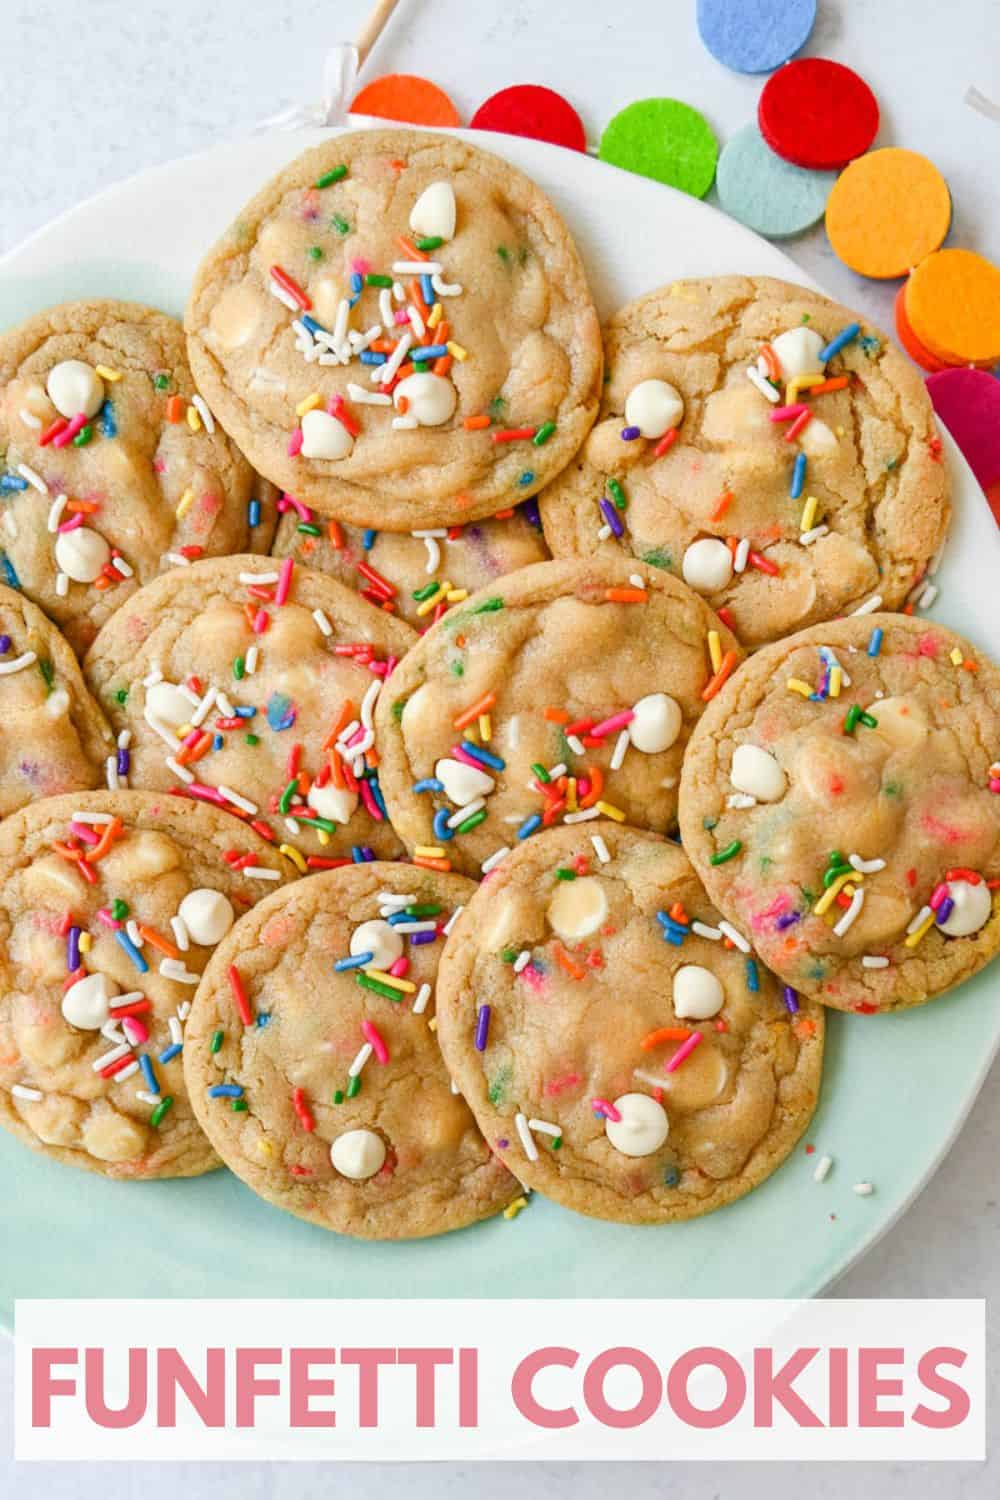 Sugar Cookies with Sprinkles and White Chocolate Chips